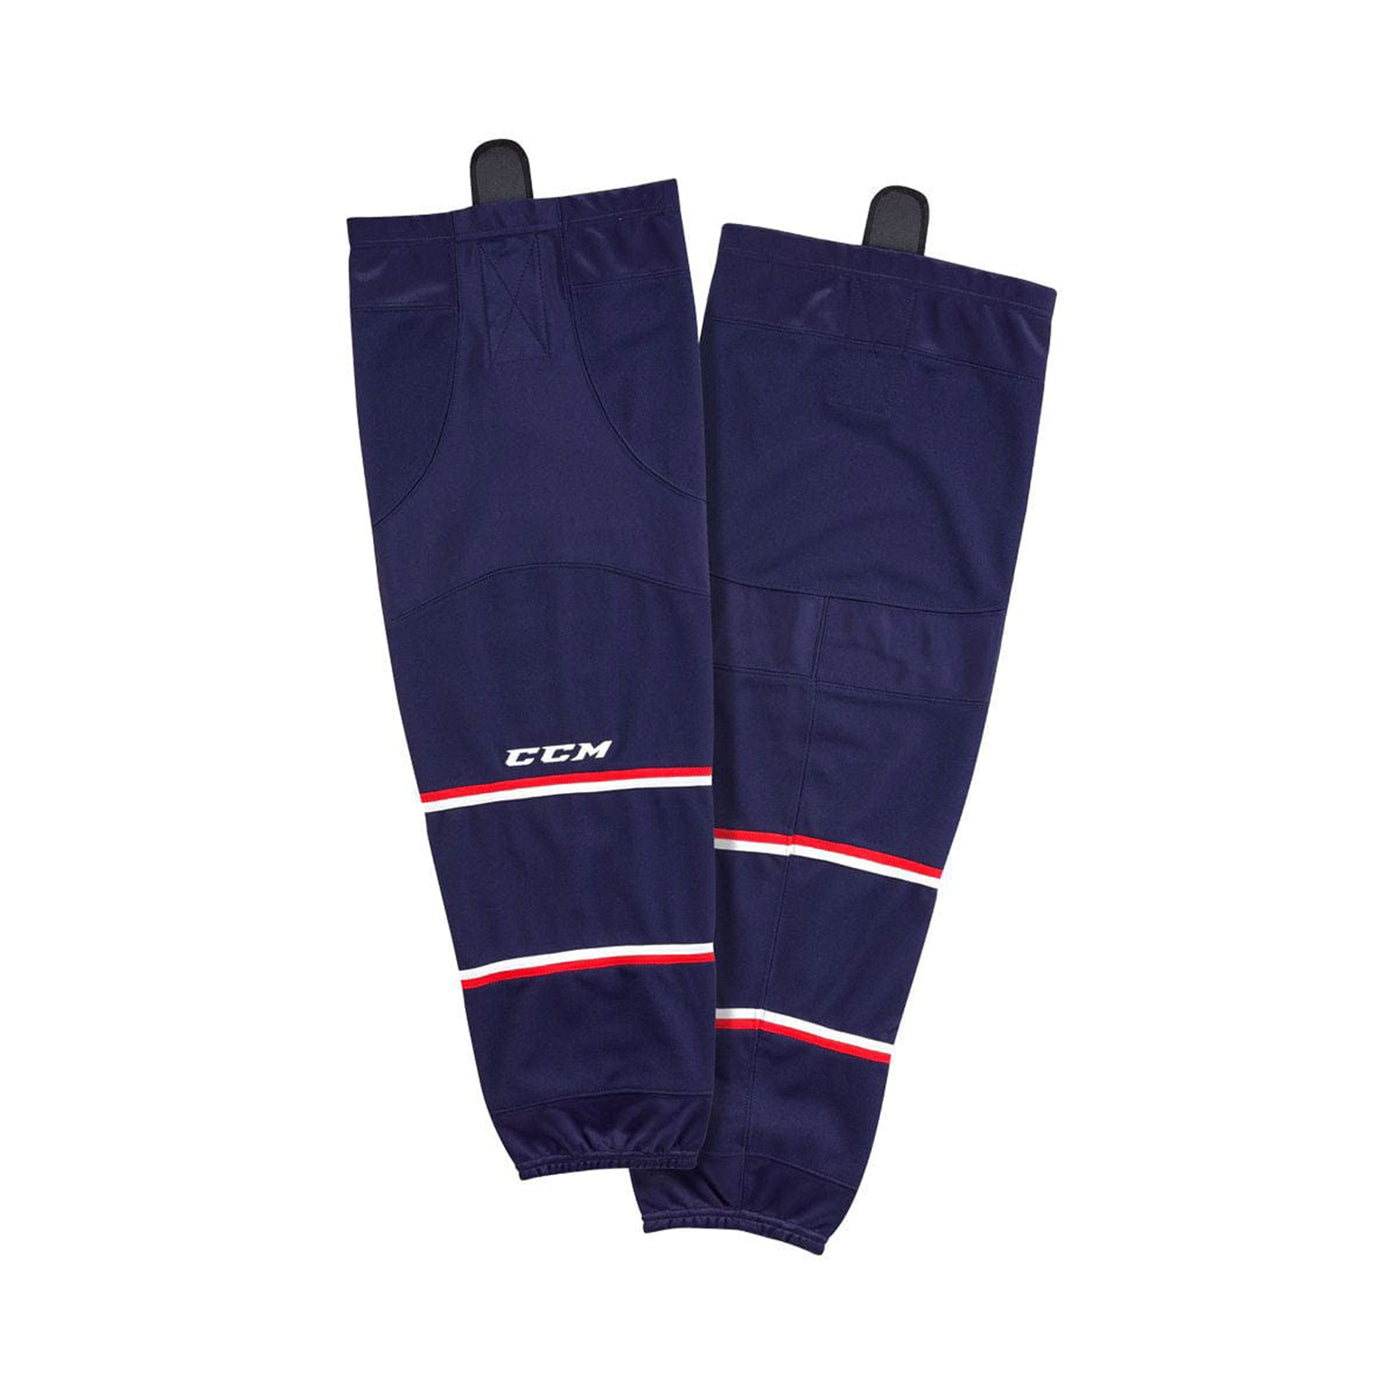 Columbus Blue Jackets Home CCM Quicklite 8000 Hockey Socks - The Hockey Shop Source For Sports